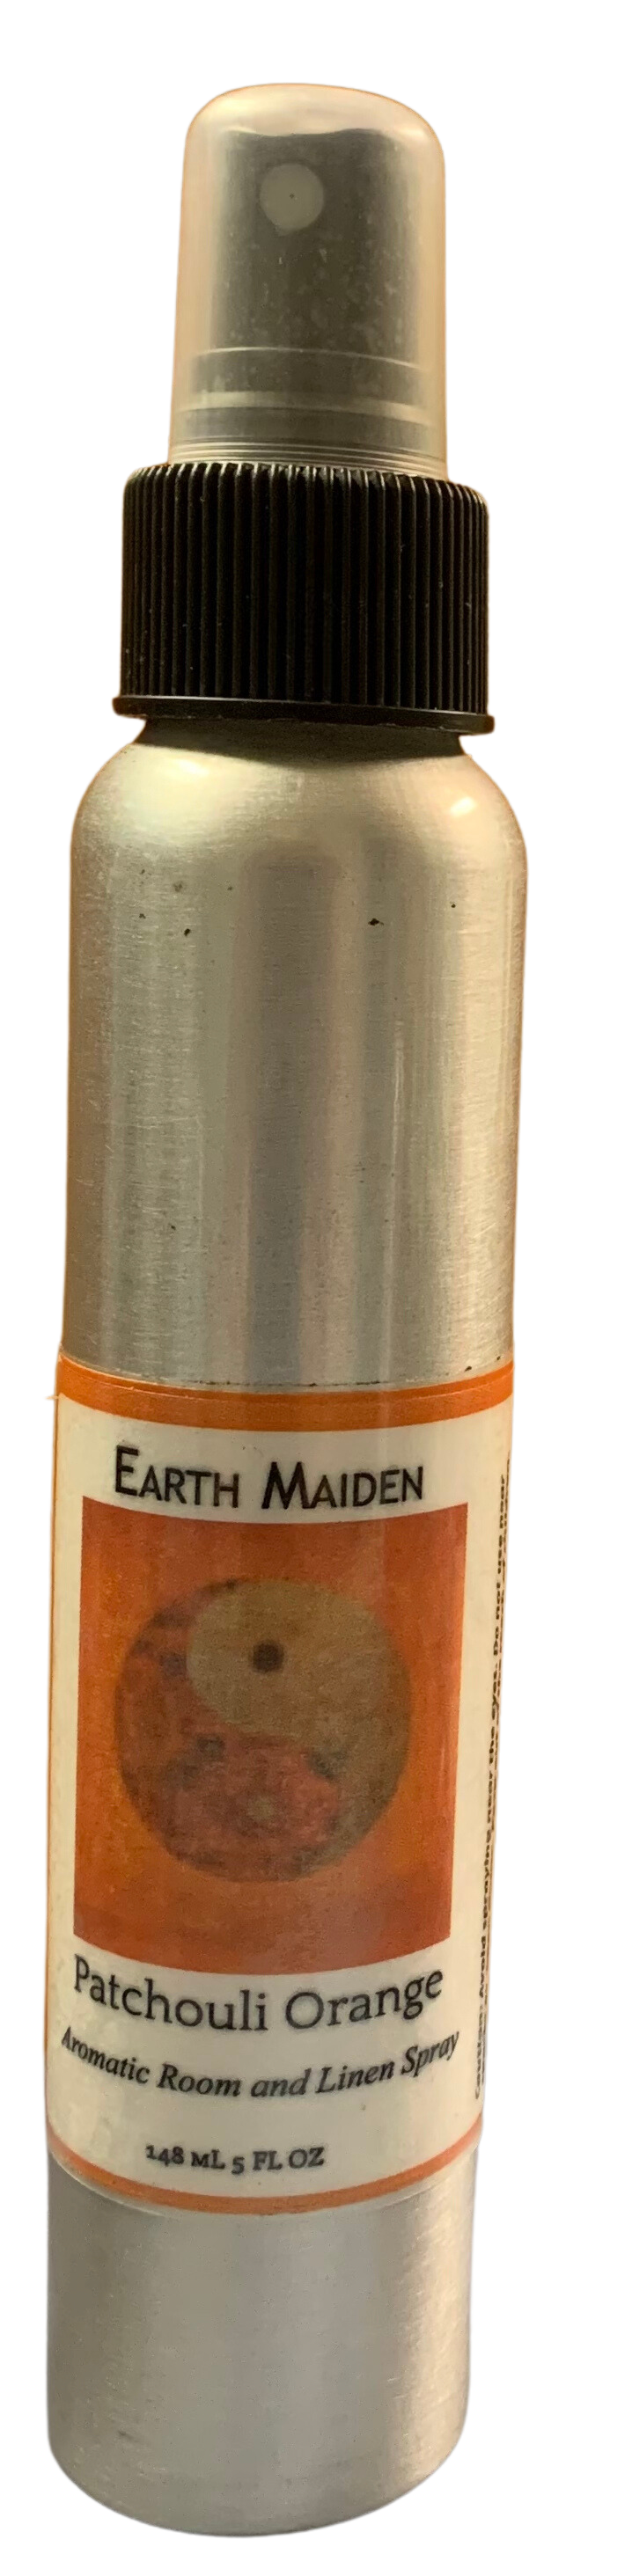 All Natural “Patchouli Orange” Aroma Mist with Valencia Orange, Patchouli and May Chang Essential Oils in 5-ounce metal bullet container with fine mist sprayer.